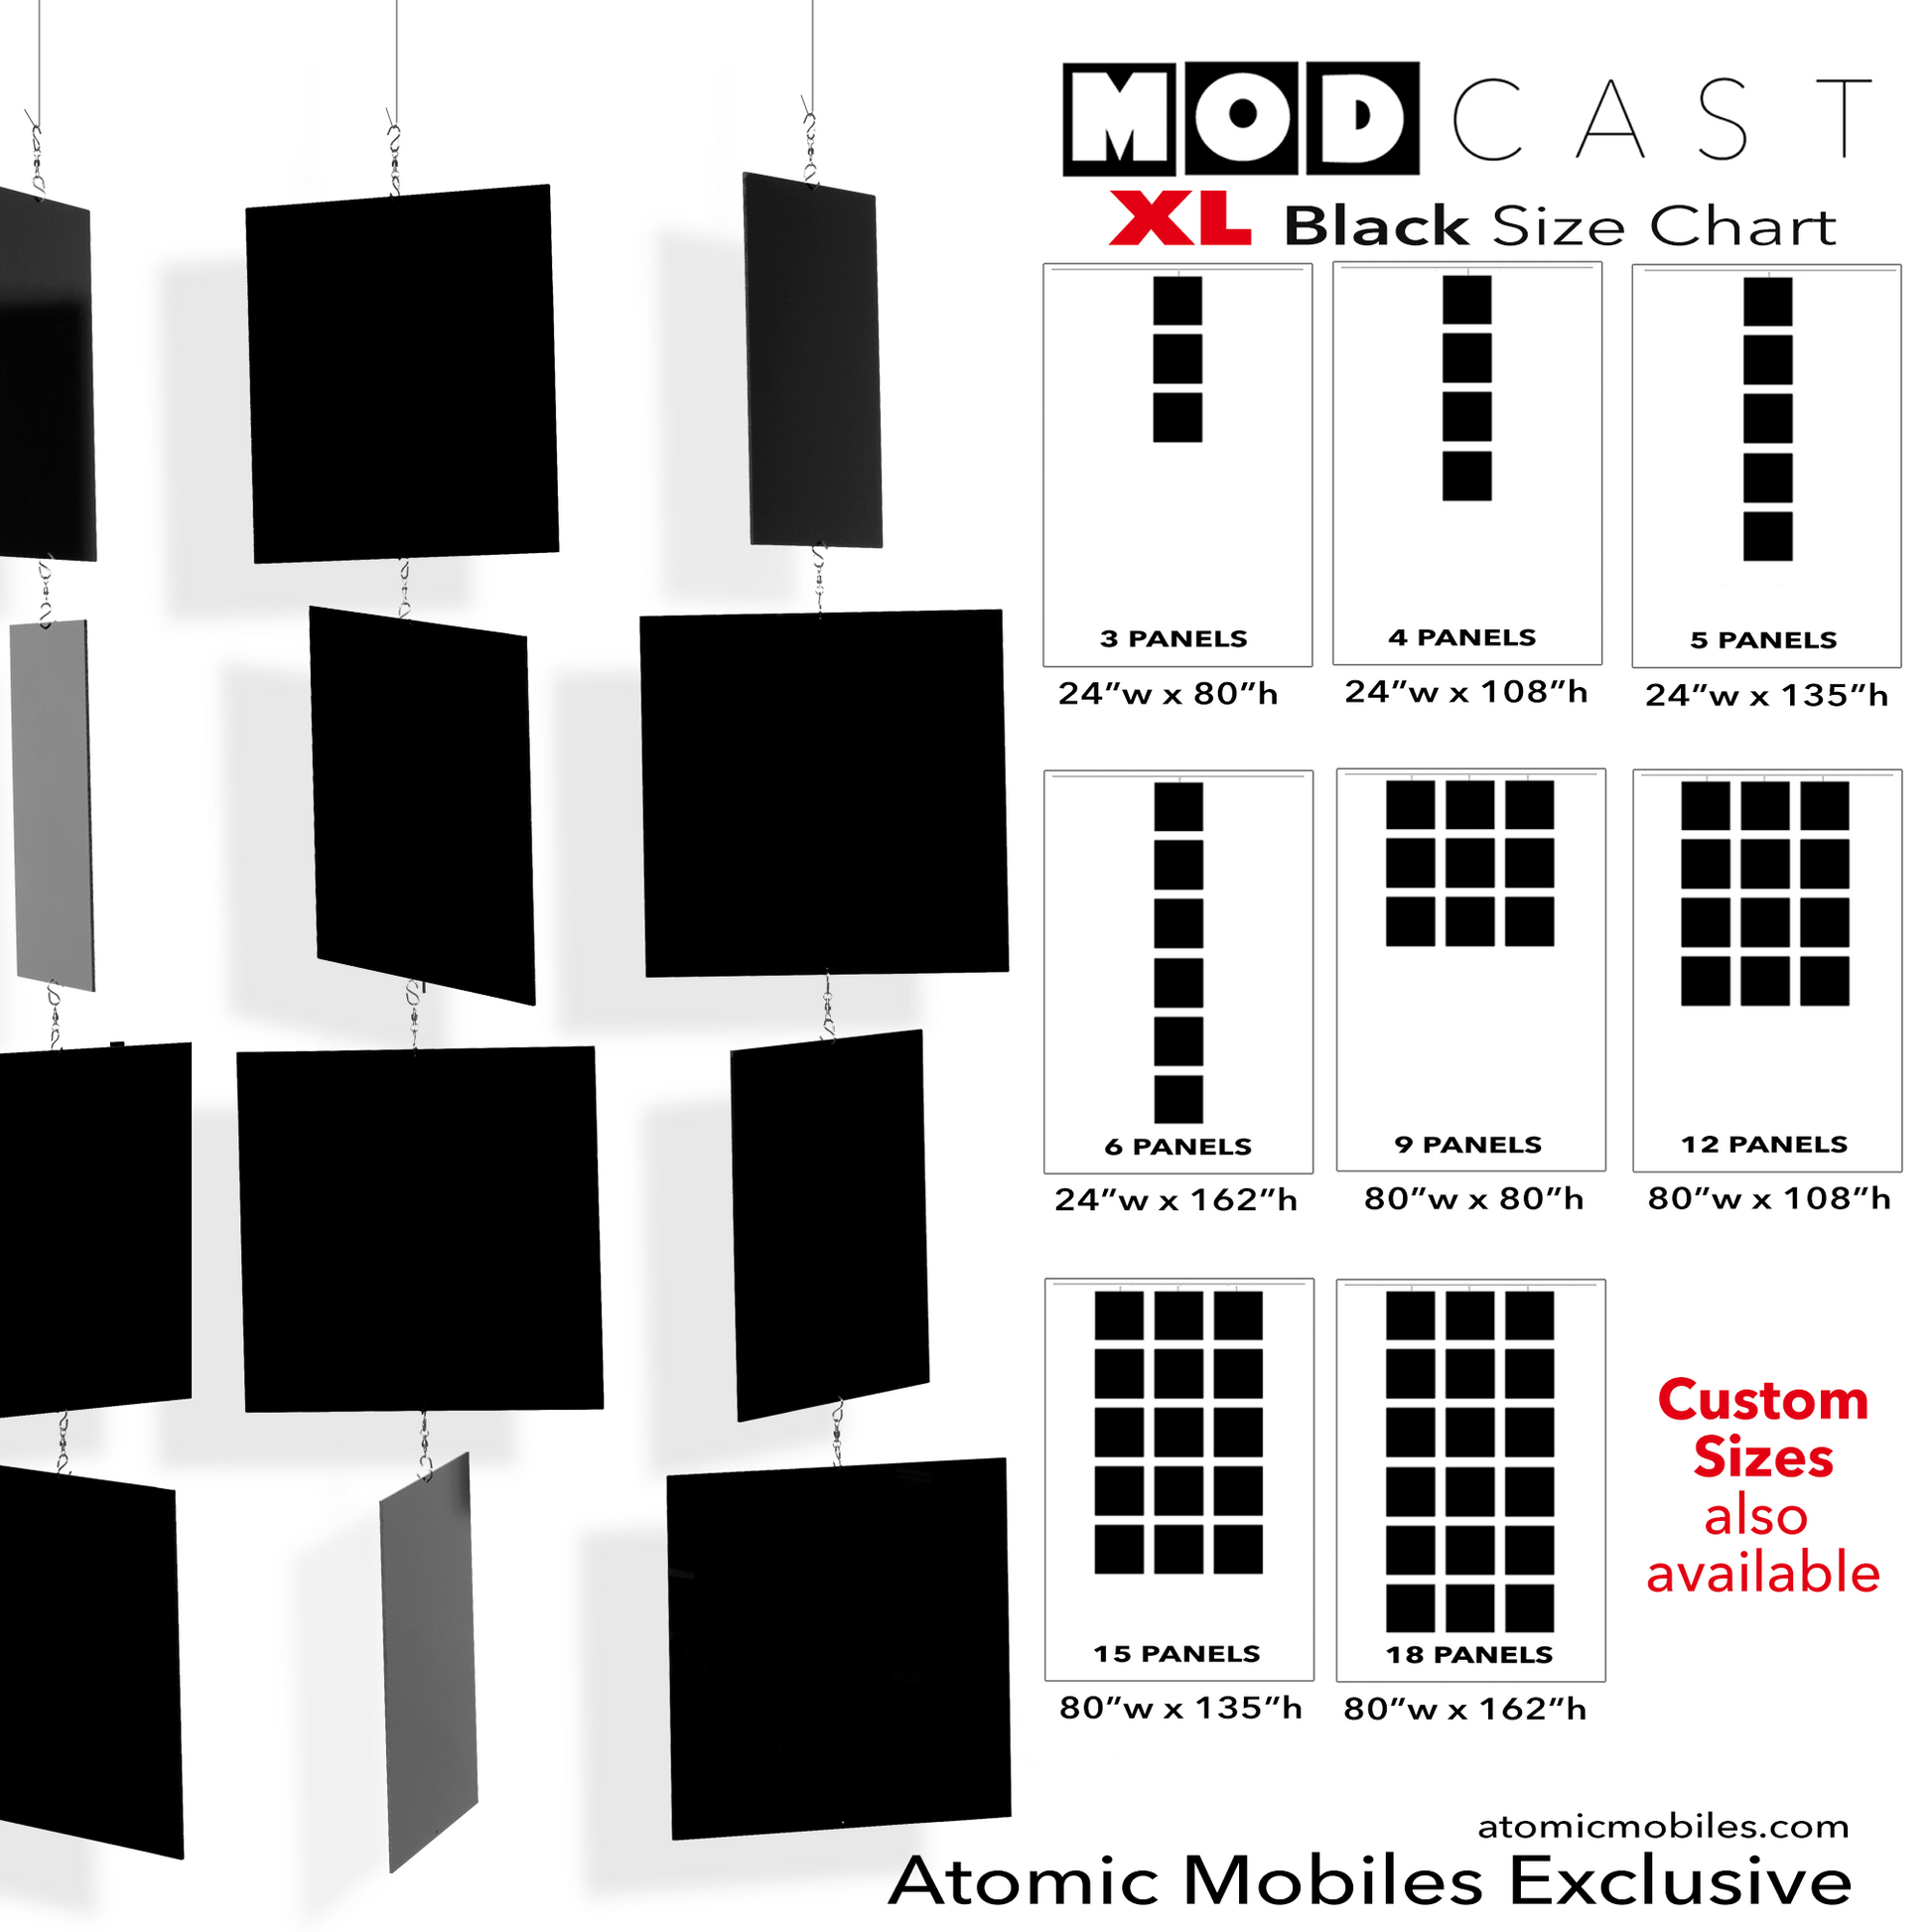 Size Chart for Black MODcast XL Architectural Hanging Art Mobiles - mid century modern inspired hanging kinetic art mobiles by AtomicMobiles.com